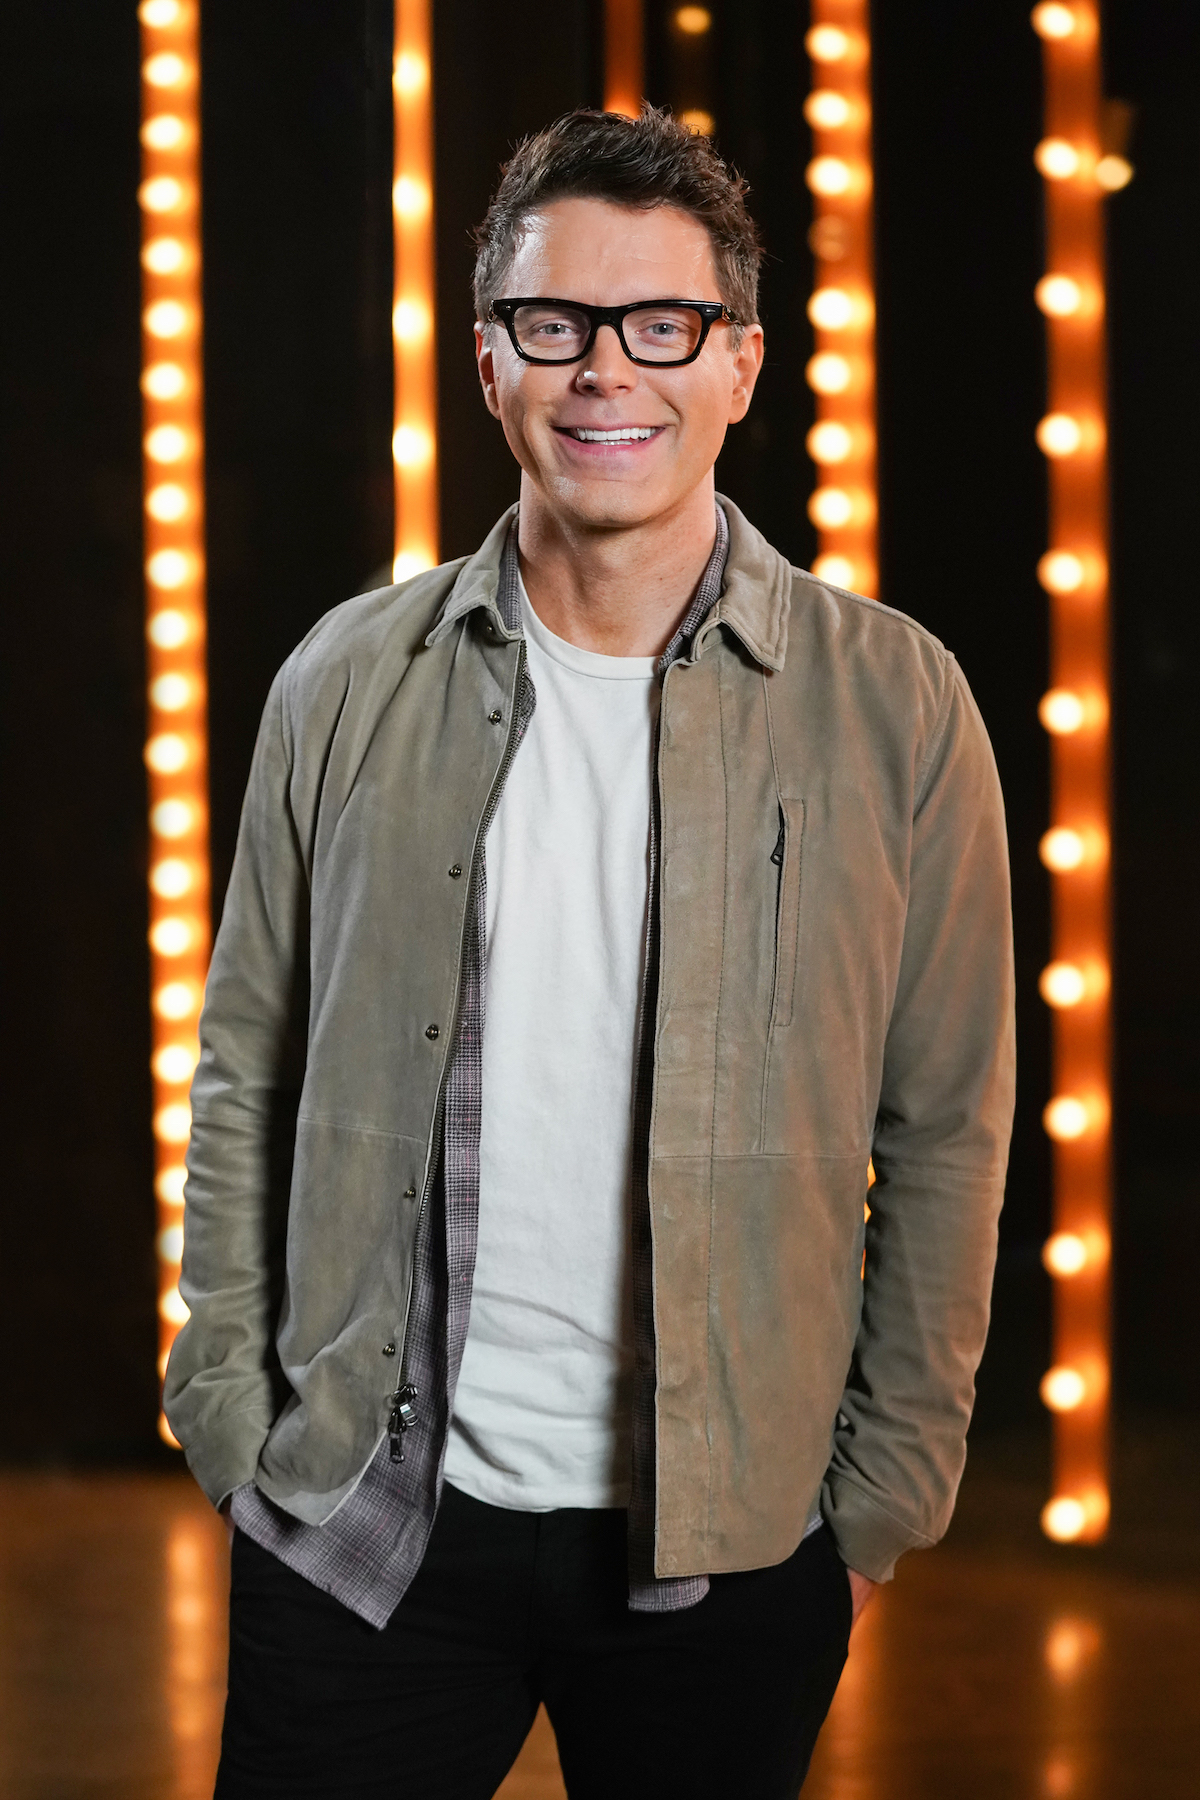 Bobby Bones, To Tell the Truth